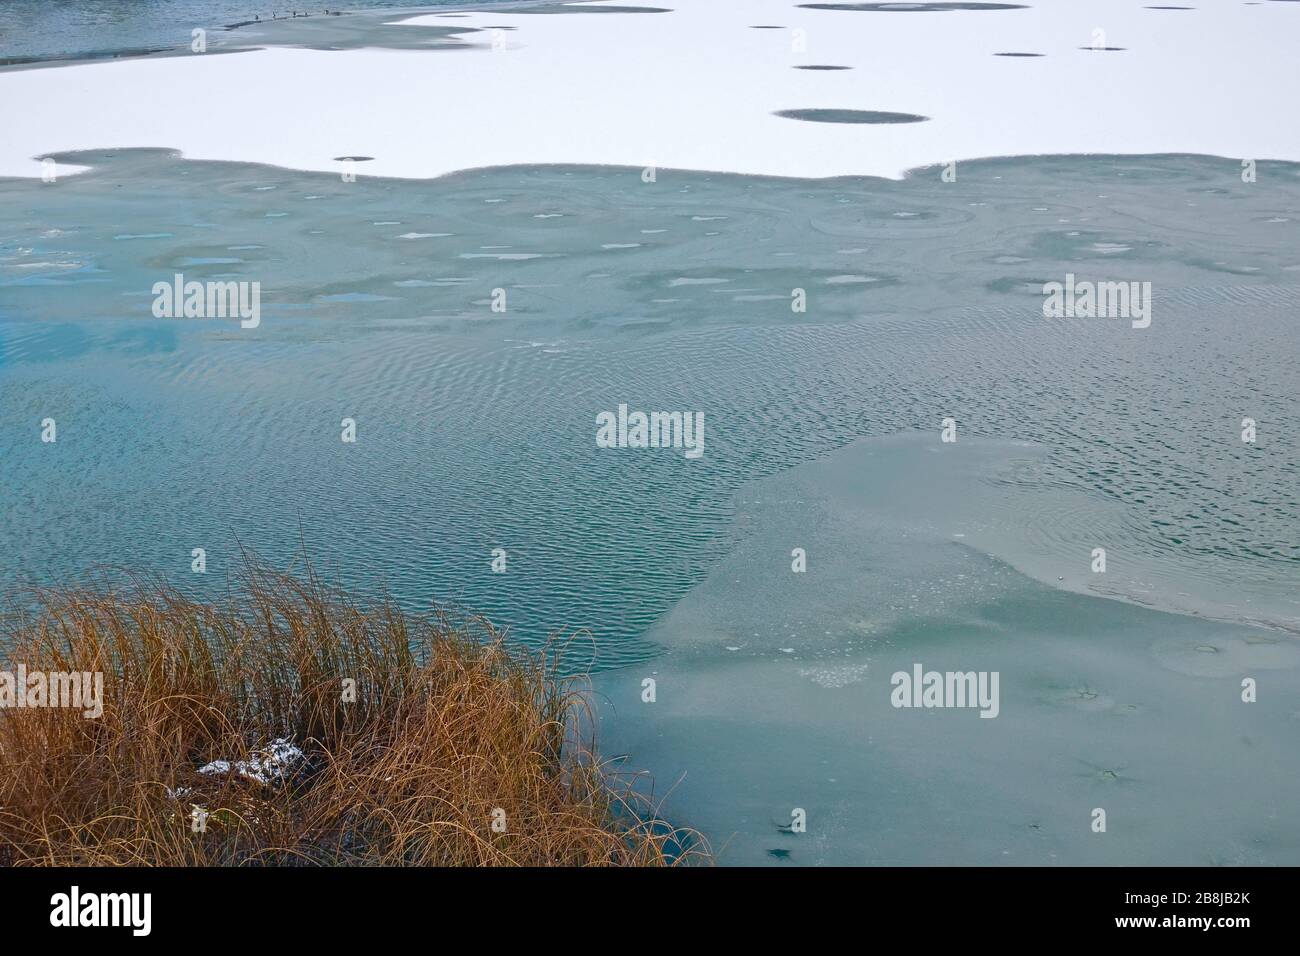 Lake freezes in early winter, waves on water surface, reed plants on foreground Stock Photo